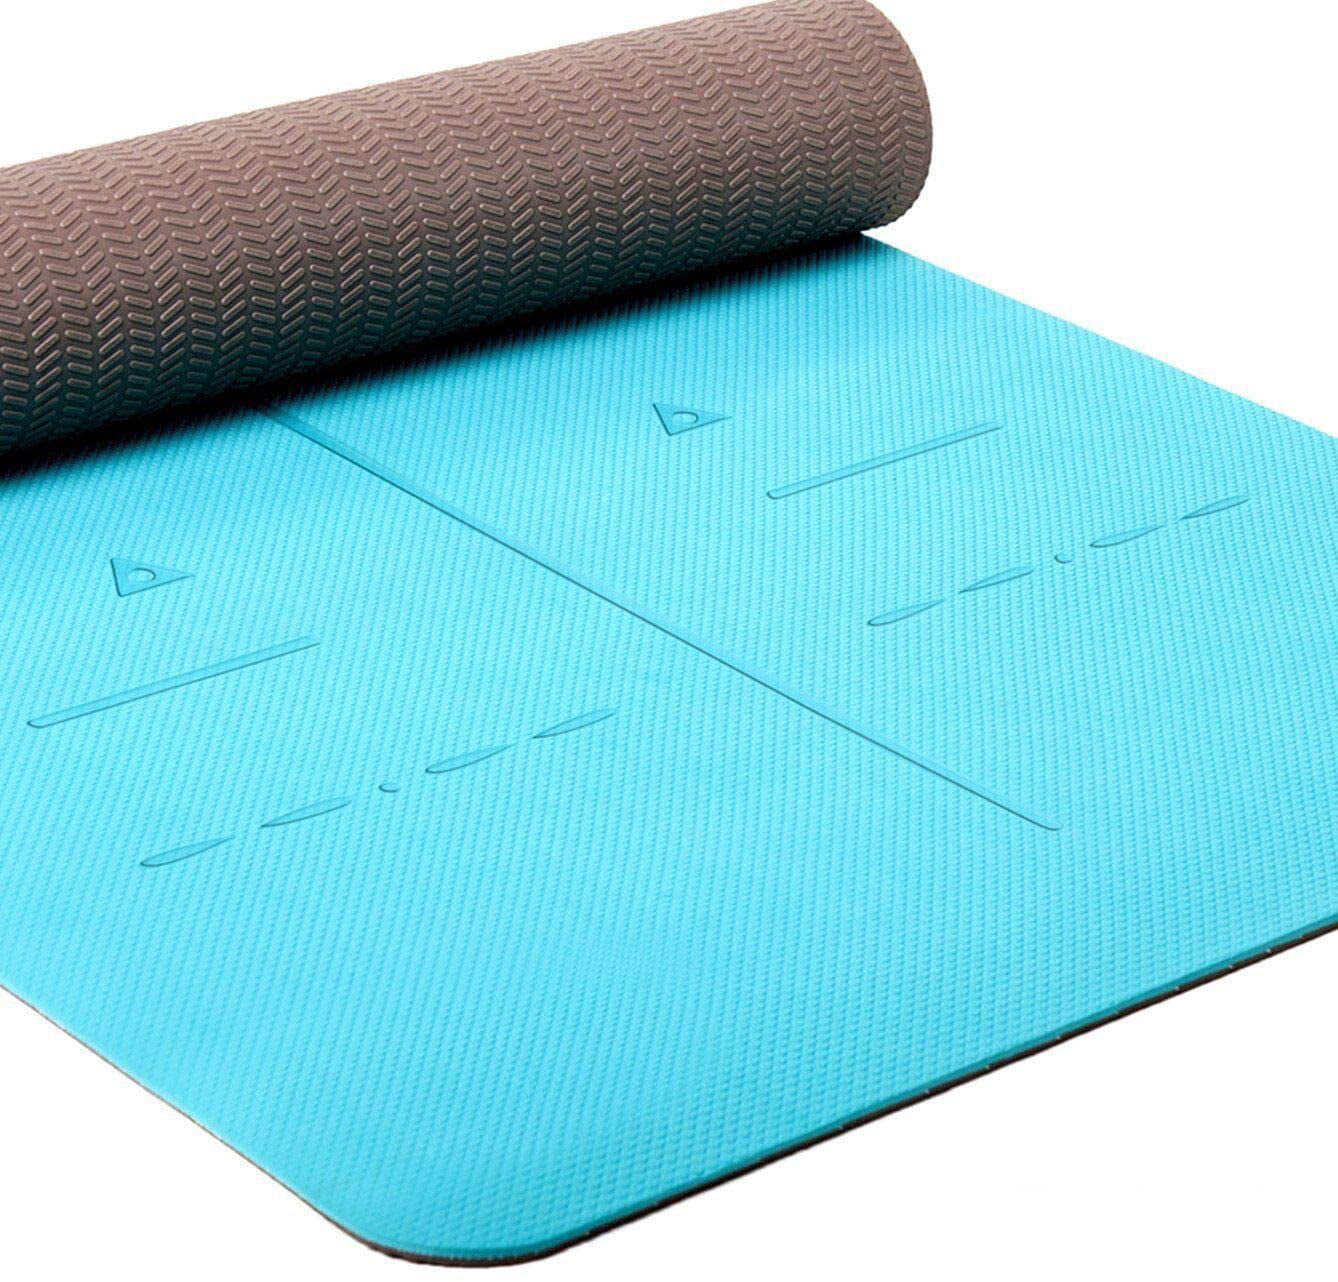 Rishikesh PVC Yoga Mat for Exercise SGS Certified Washable Non-Toxic 4.5 mm Excellent Shock-Absorption 